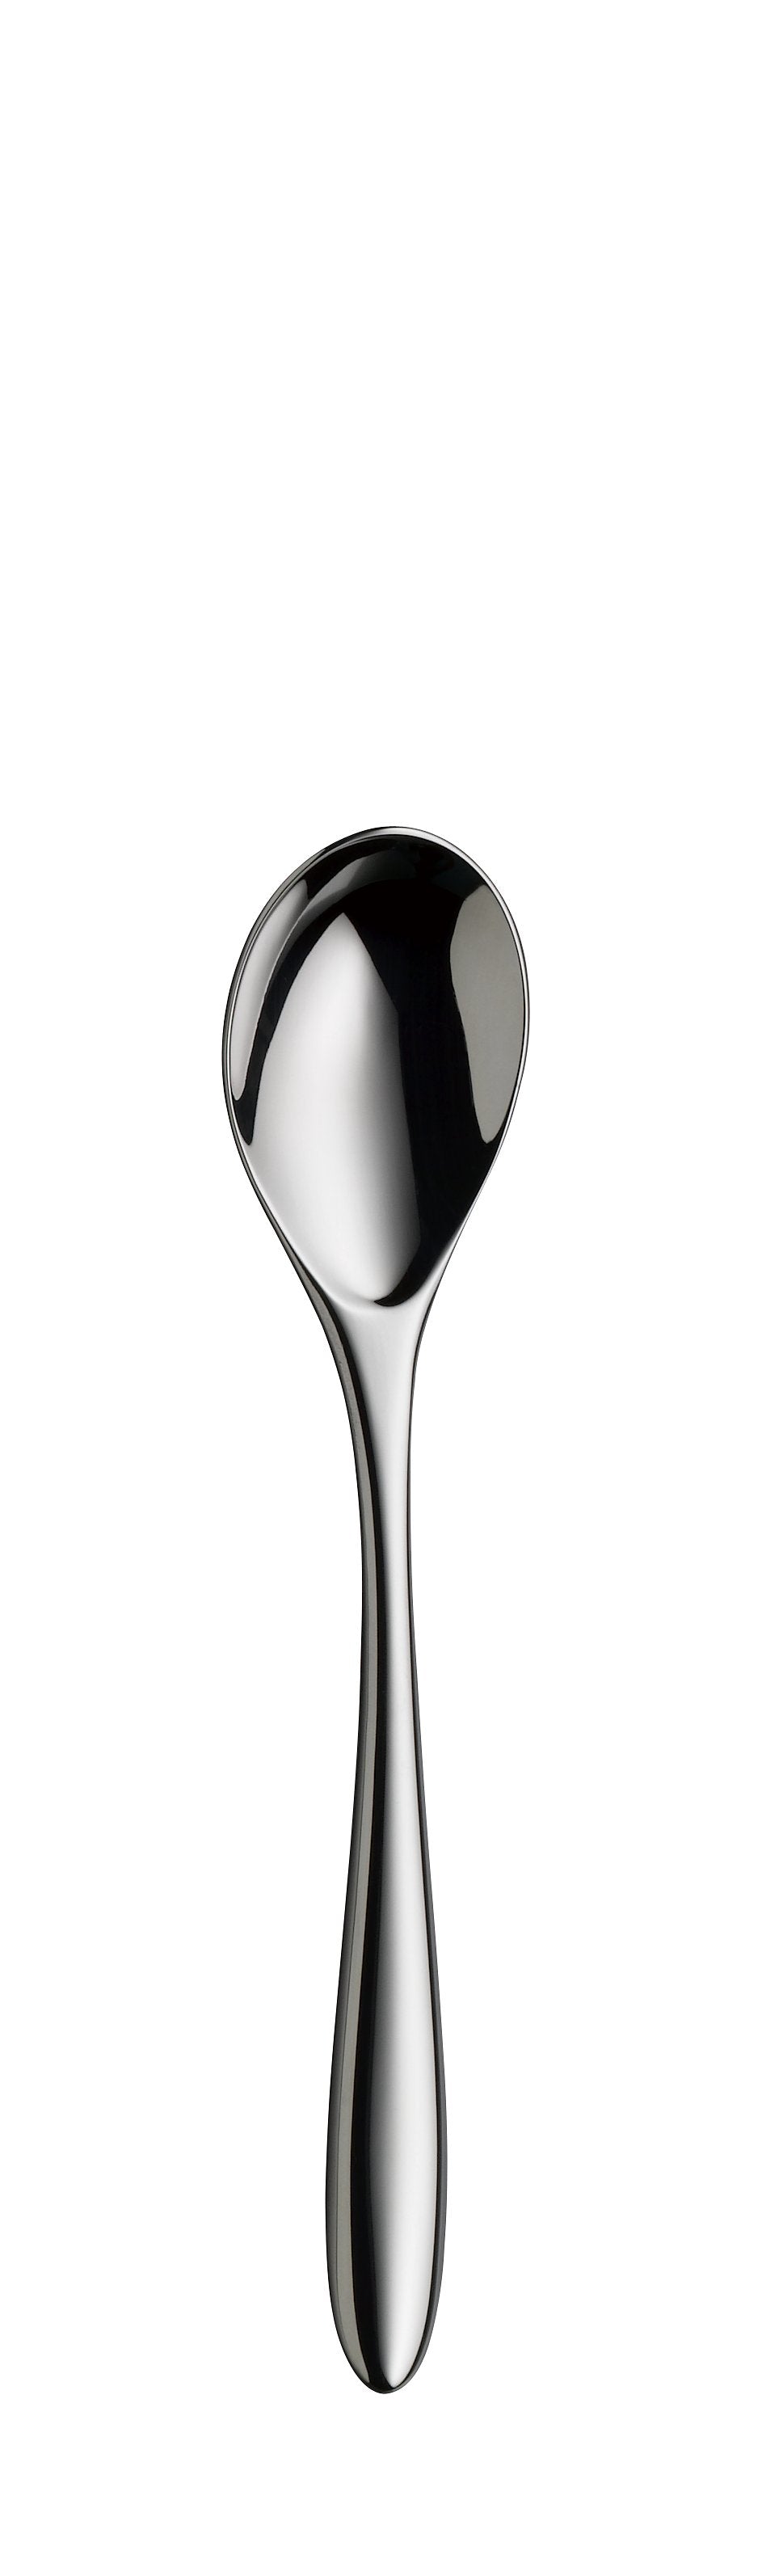 Dessert spoon AVES silver plated 159mm